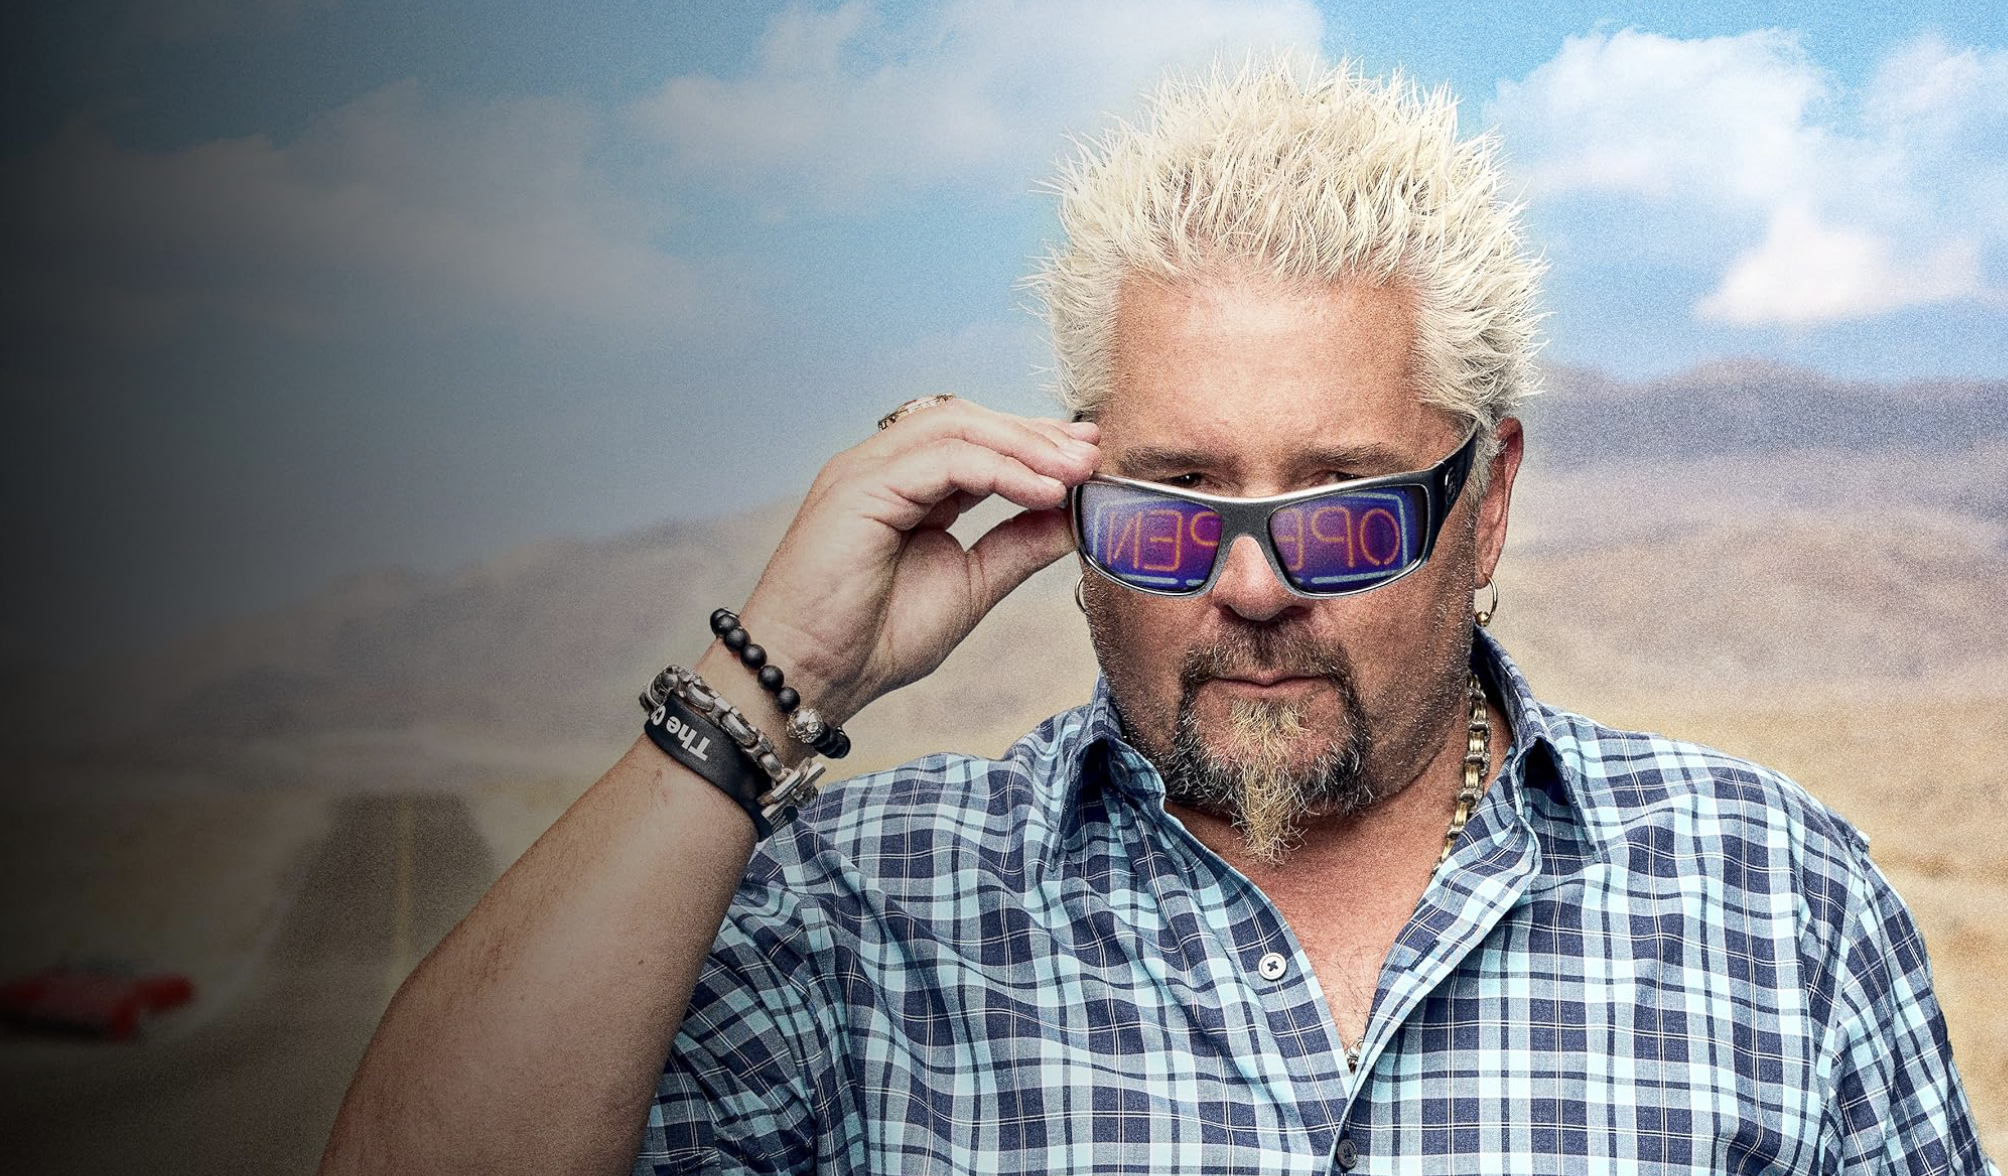 12 Bonkers Facts About Diners, Drive-Ins, and Dives